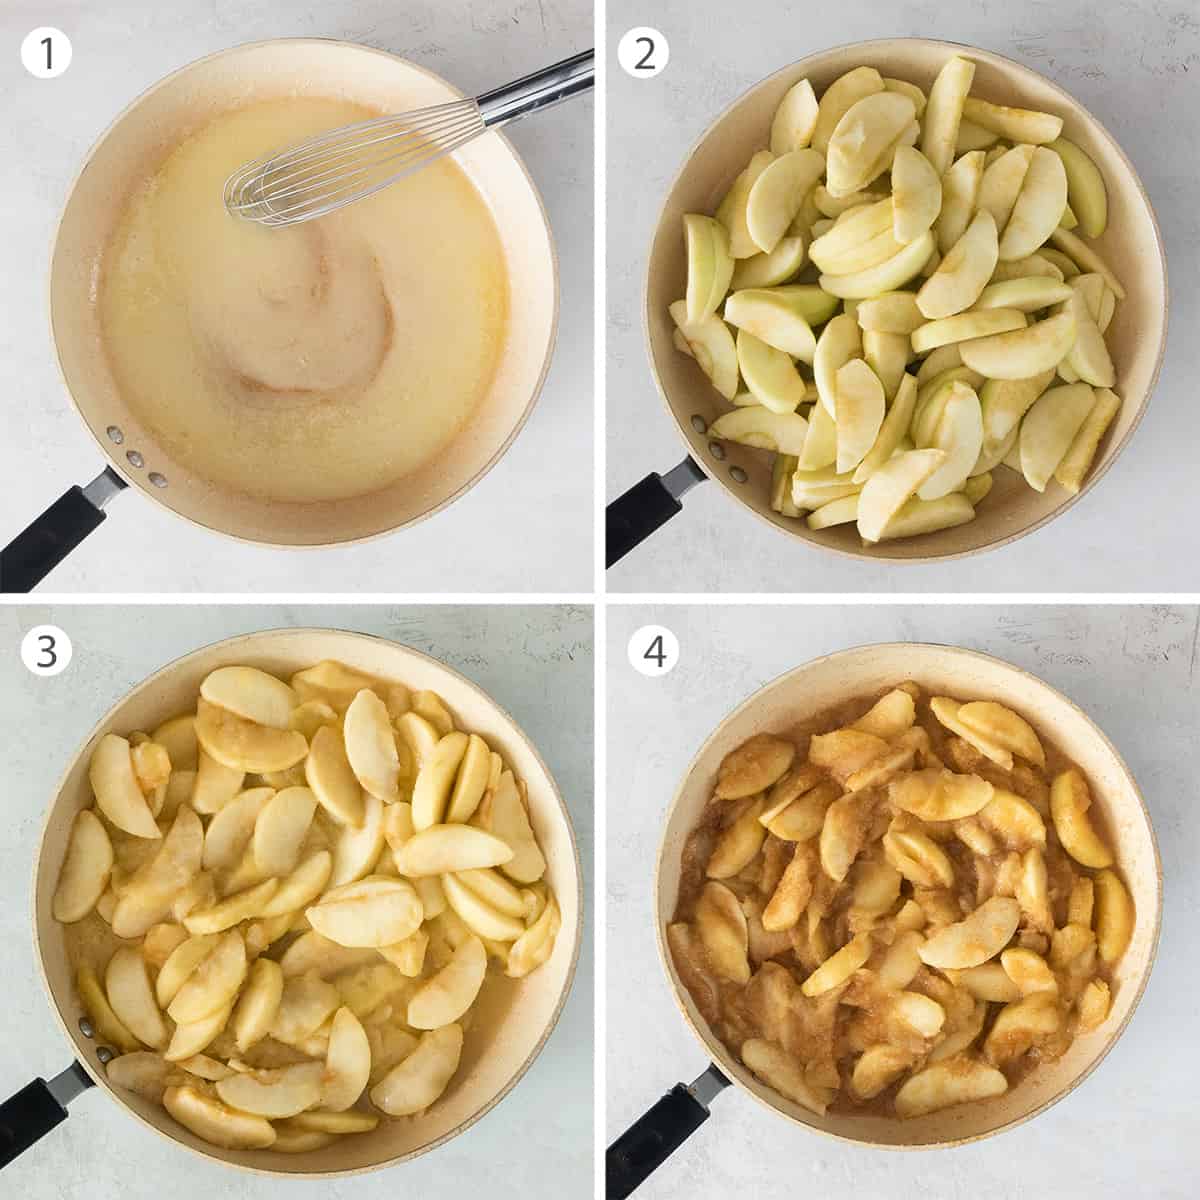 Steps to making fried apples including butter and before and after cooking the apples.